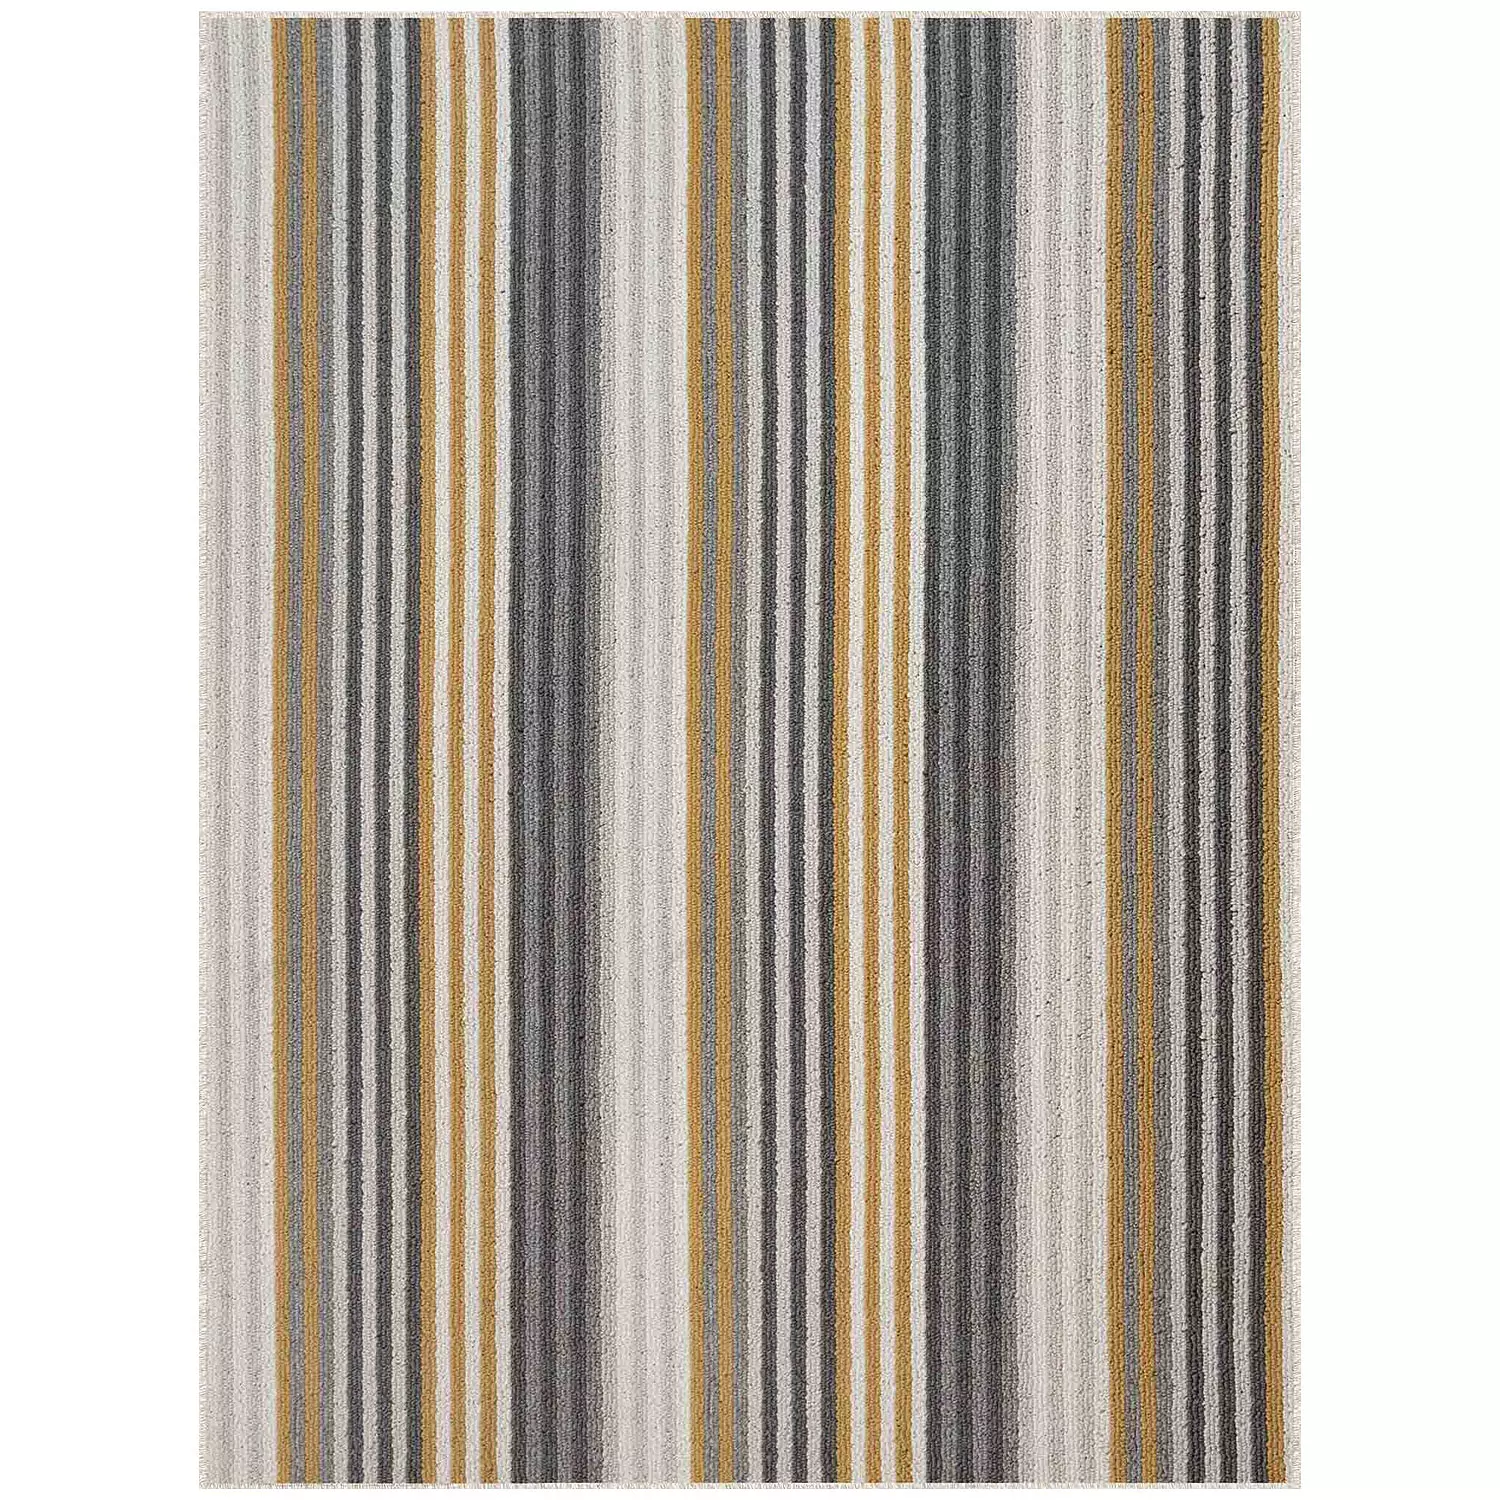 NEWPORT Collection - Goldfinch rug, 3'x4'